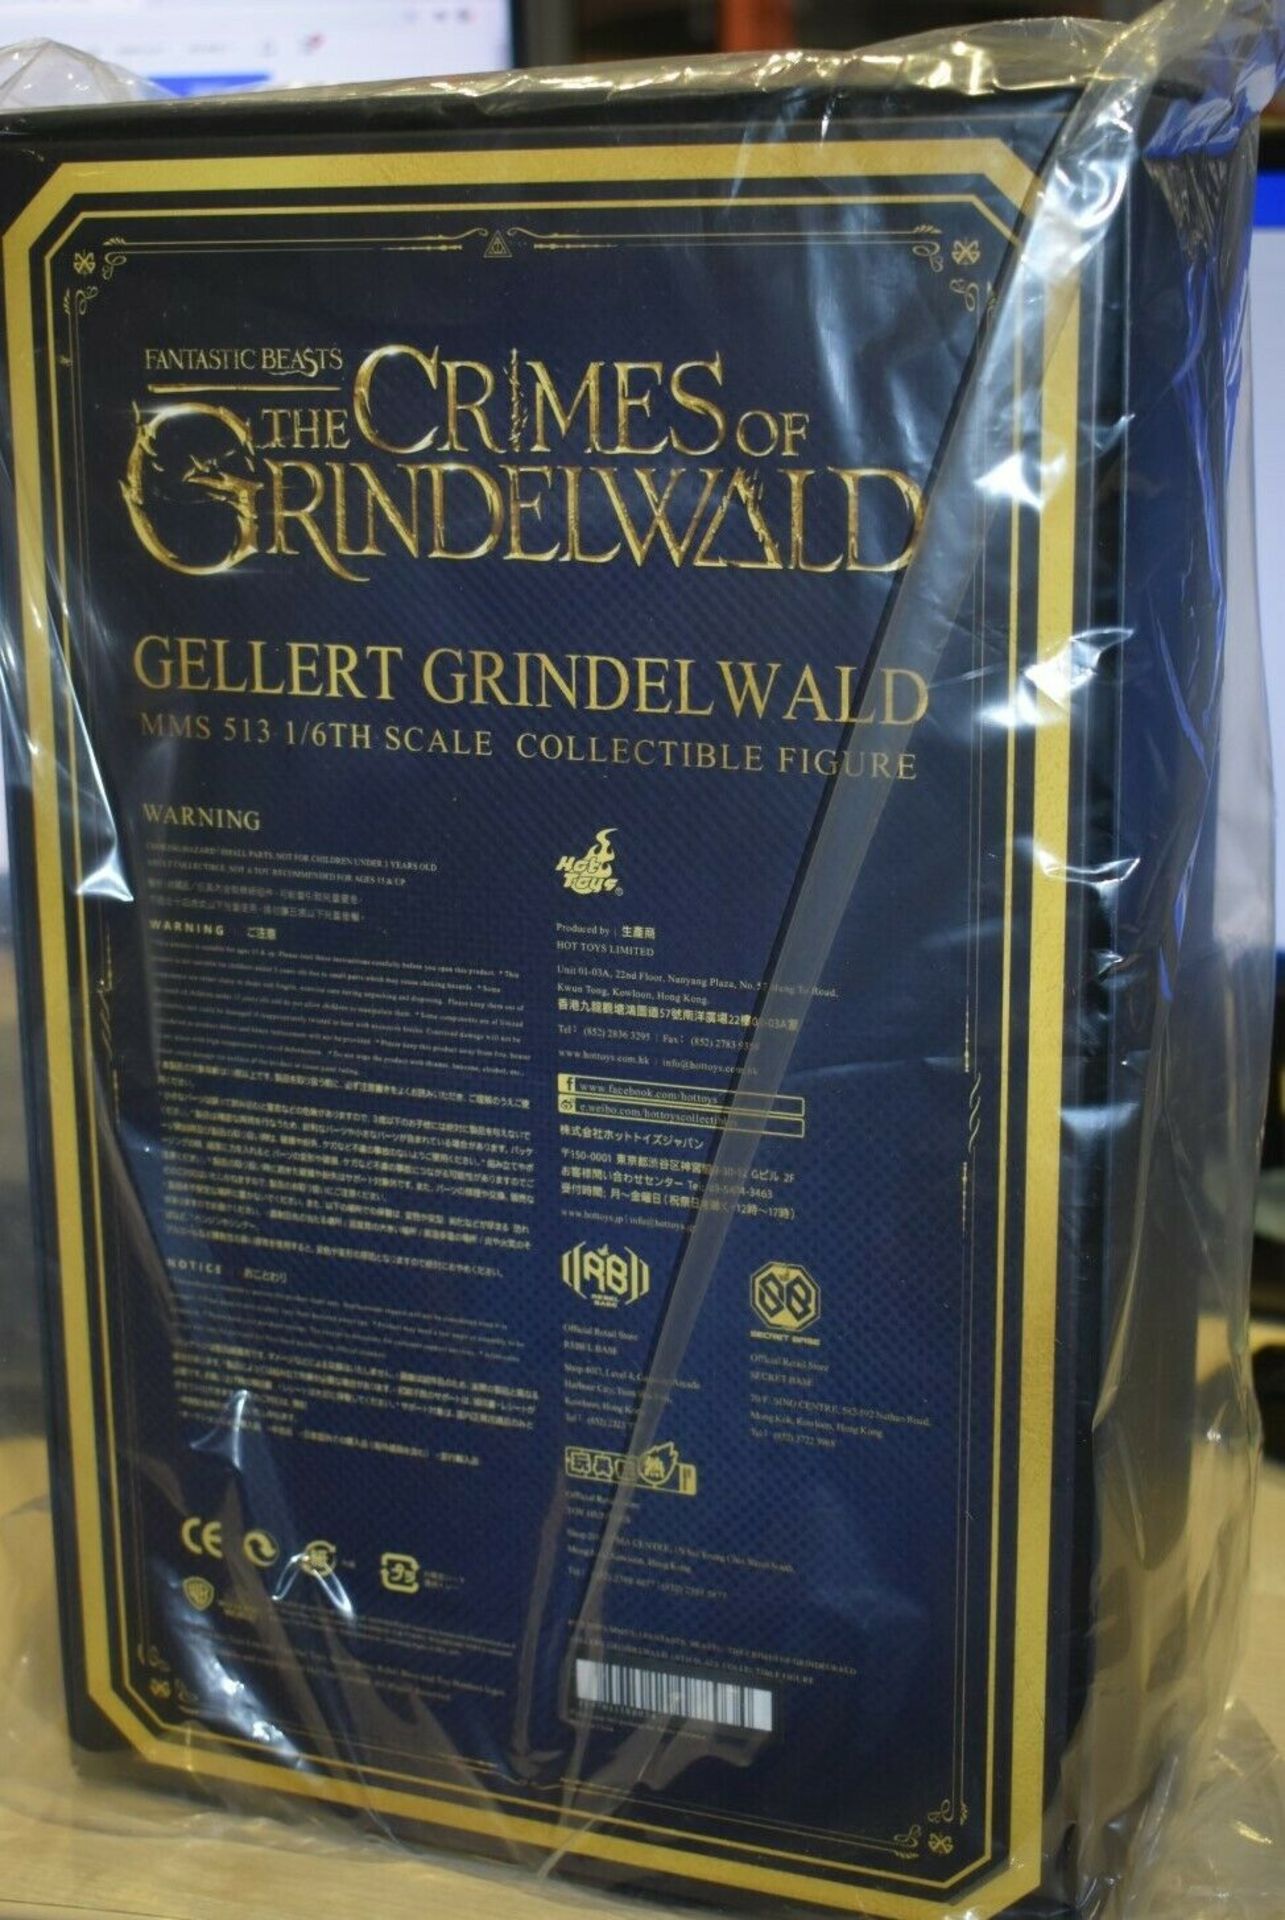 1 x Hot Toys Fantastic Beasts Gellert Grindelwald Special Edition 1/6 Scale - MMS513 - Brand New and - Image 4 of 4